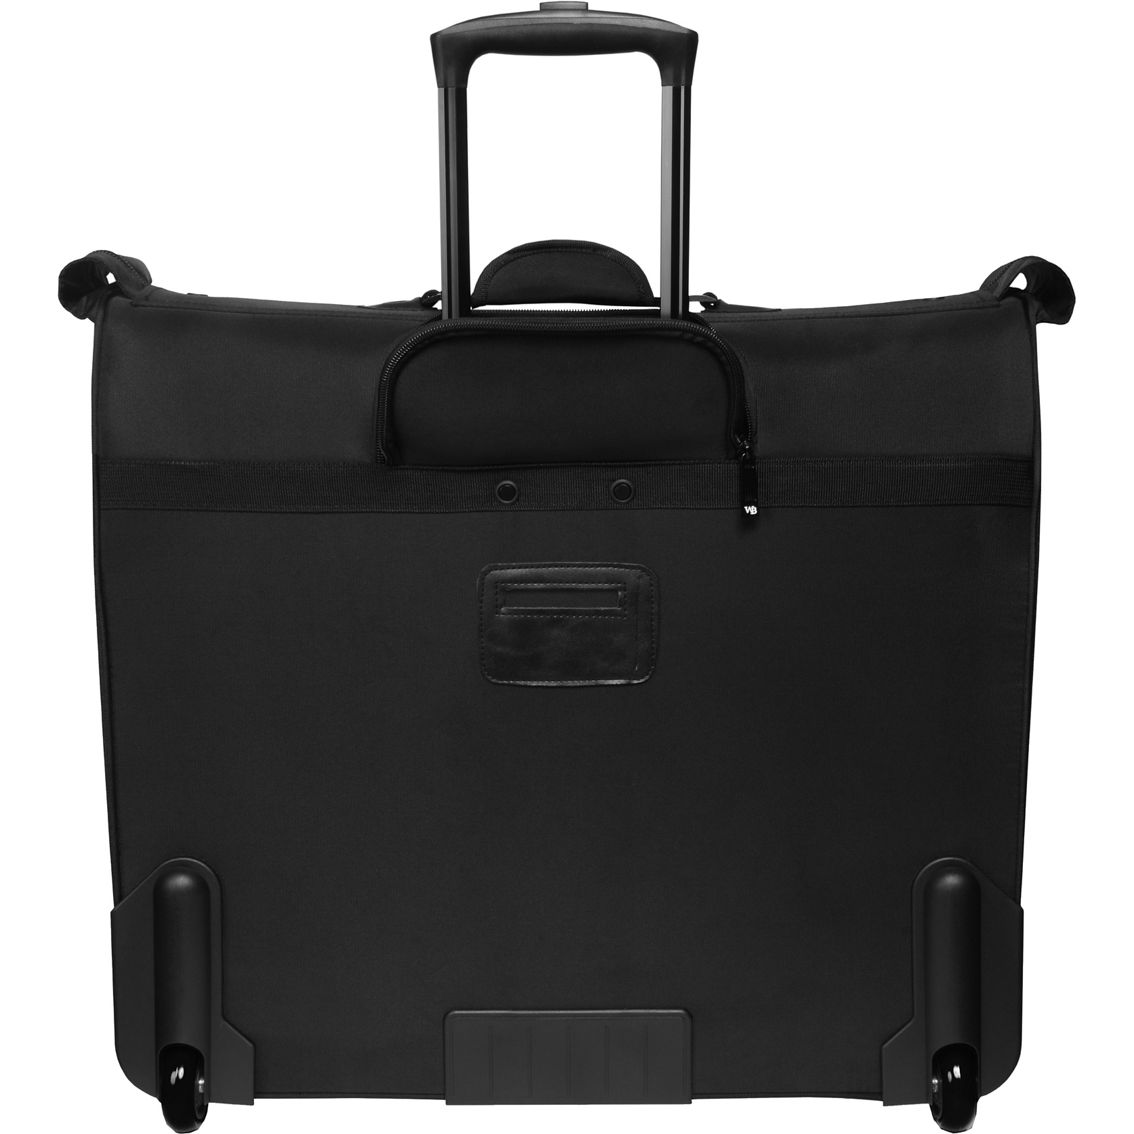 WallyBags 45 in. Premium Rolling Garment Bag with Multiple Pockets - Image 3 of 6